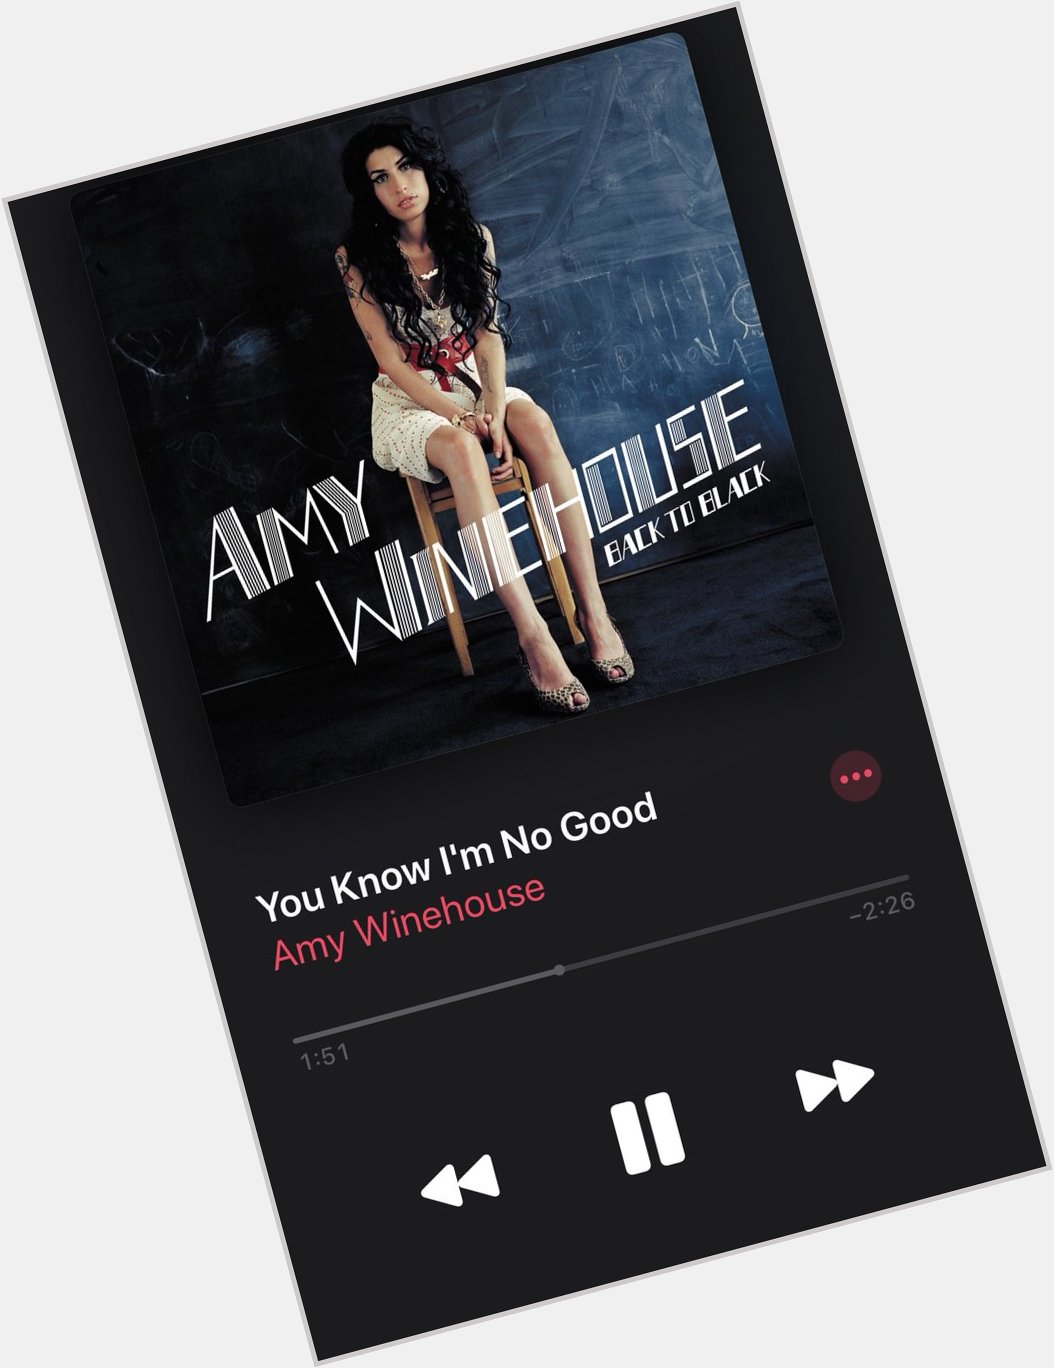 Happy birthday Amy winehouse      This is my fave song 